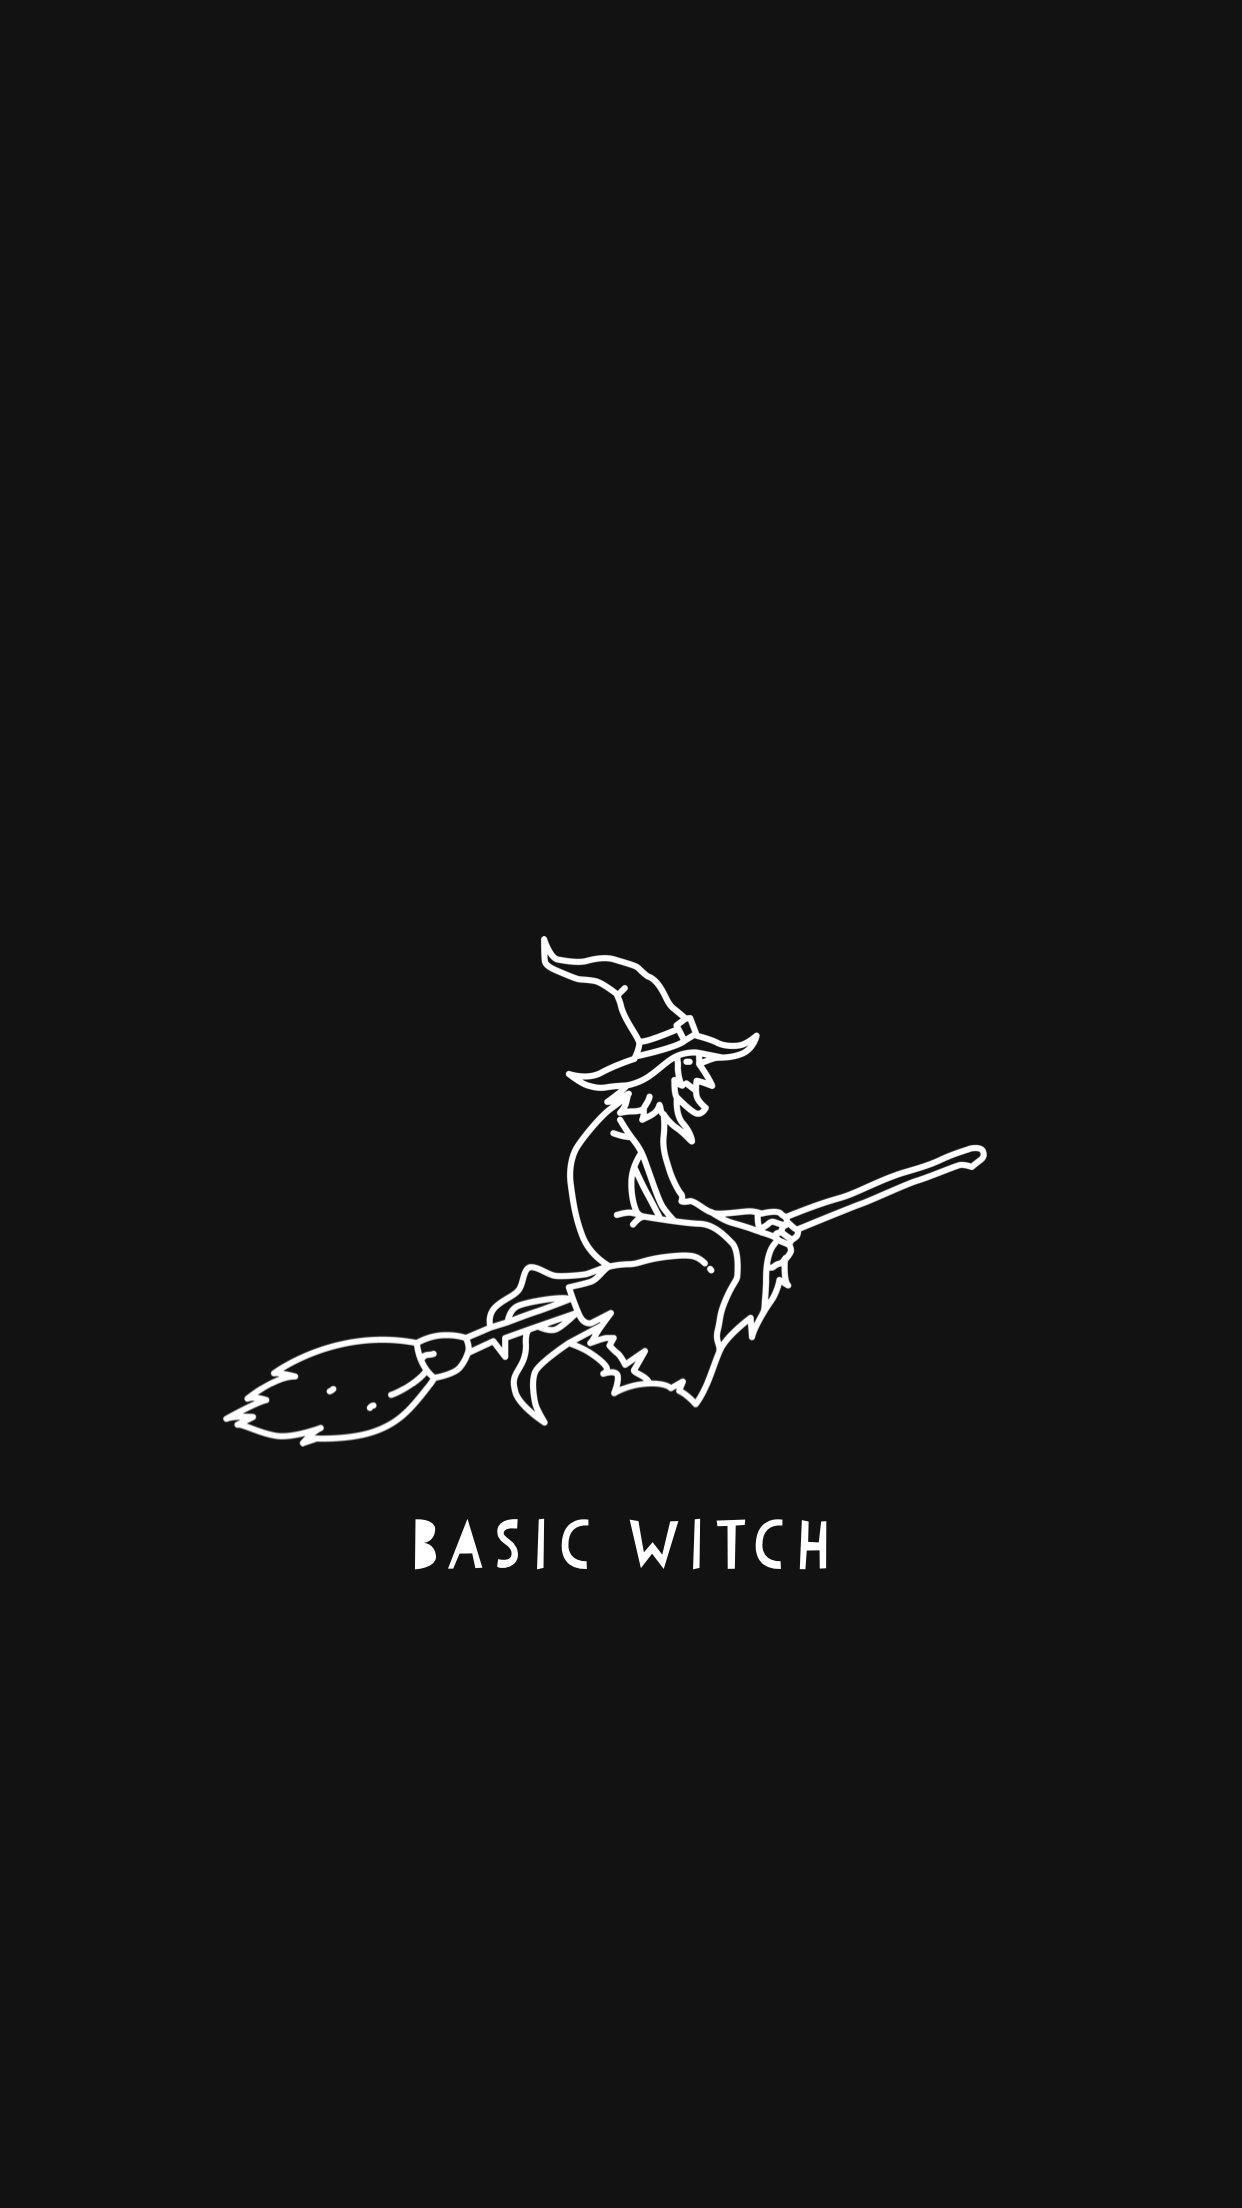 The logo for basic witch - Witch, gothic